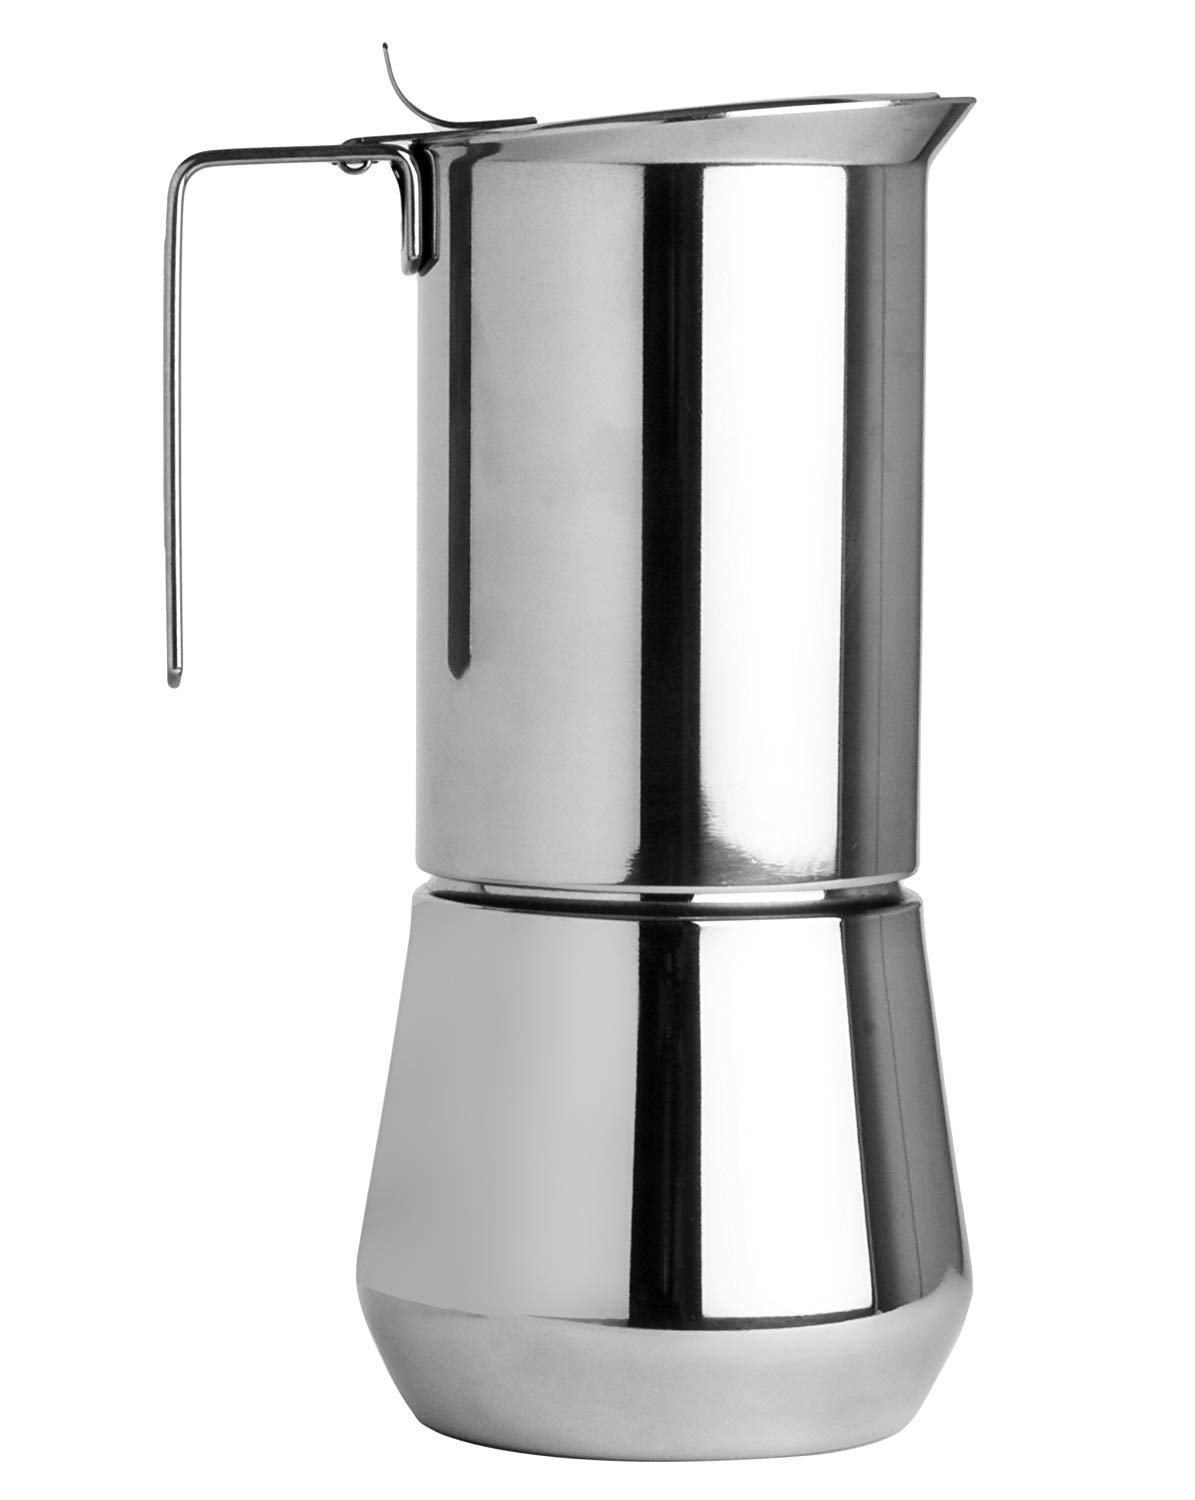 Ilsa 0090 003 Turbo Express Stainless Steel Espresso Maker For 3 Cups